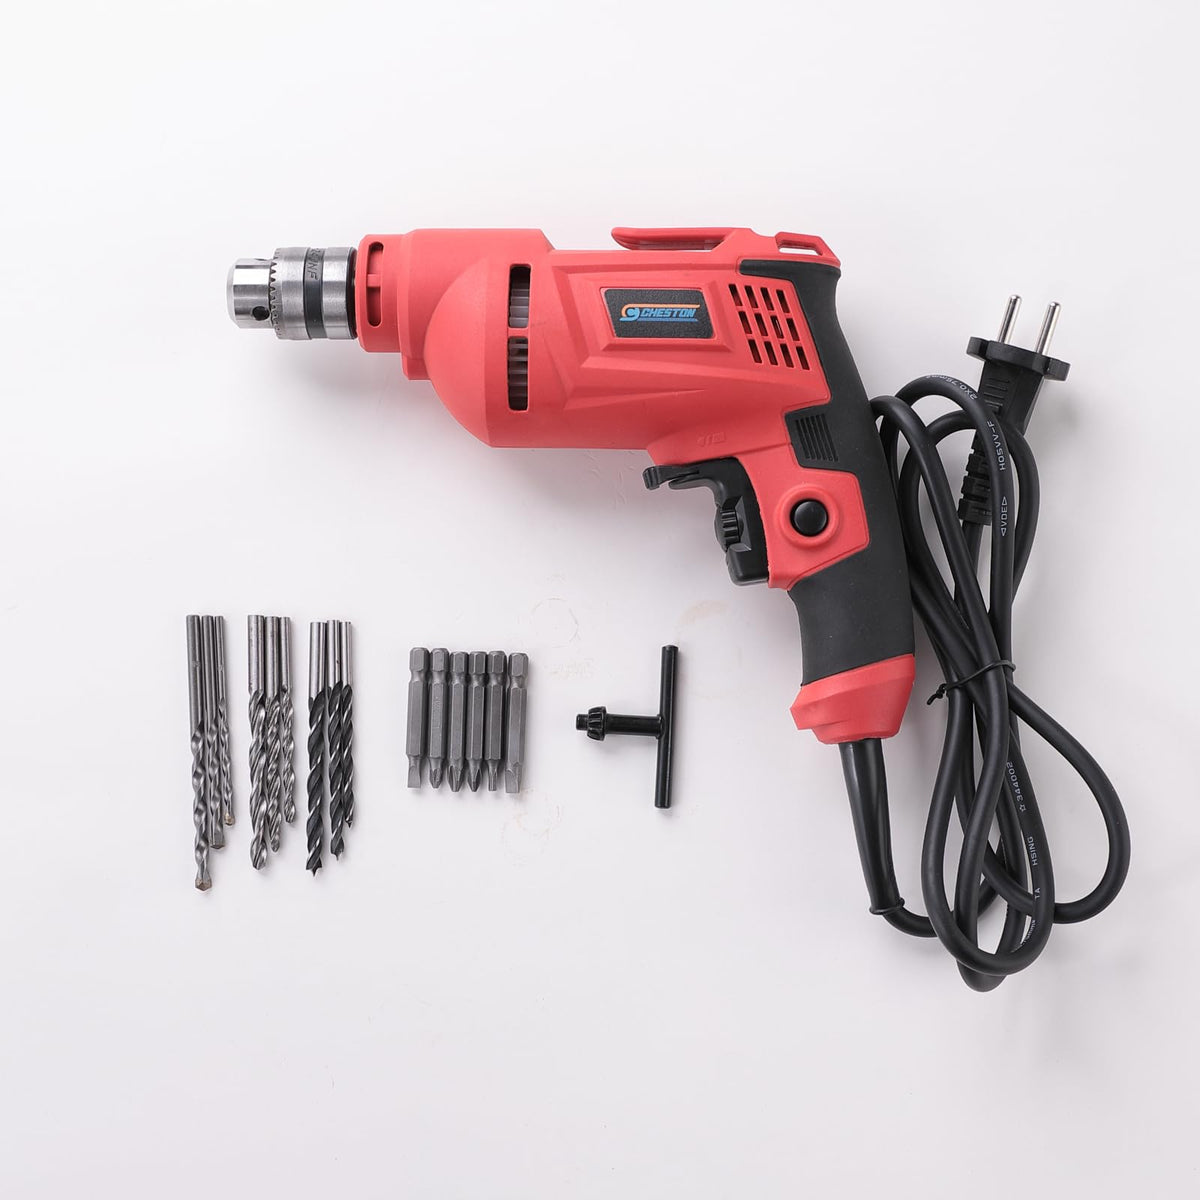 Cheston 10mm Drill Machine for Home Use | 750W 10mm Chuck 2200RPM Variable Speed | Reversible Drill Kit | Drill Kit Set with Accessories 3 Wall Bit, 3 Wood Bit, 3 Metal Bits + 6 Drill Bit Set Included